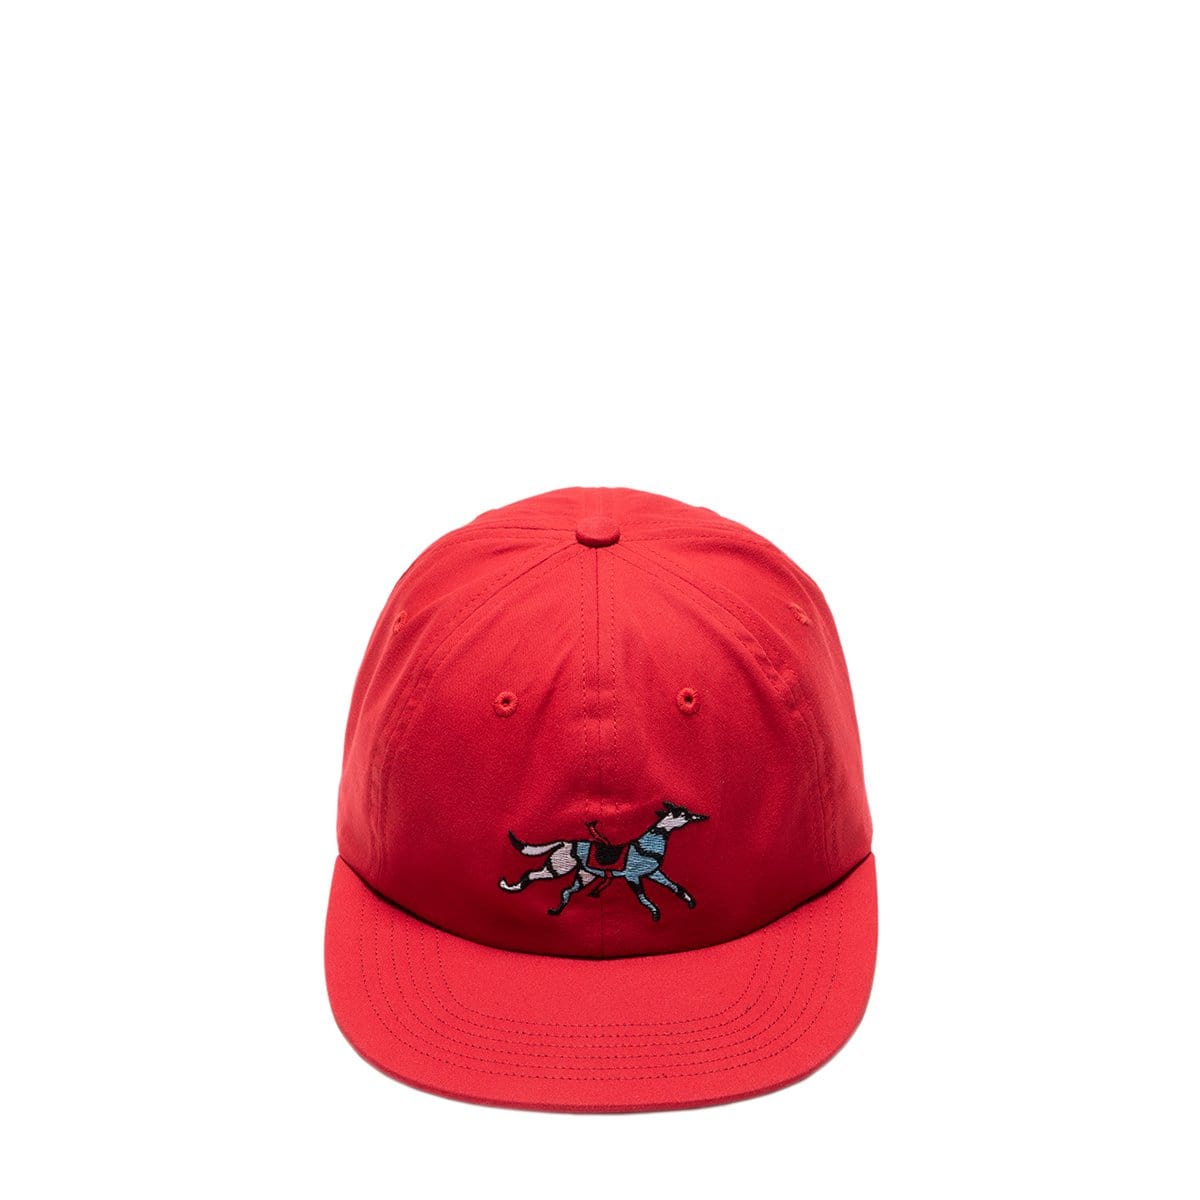 By Parra Headwear RED / O/S RUNAWAY HORSE 6 PANEL